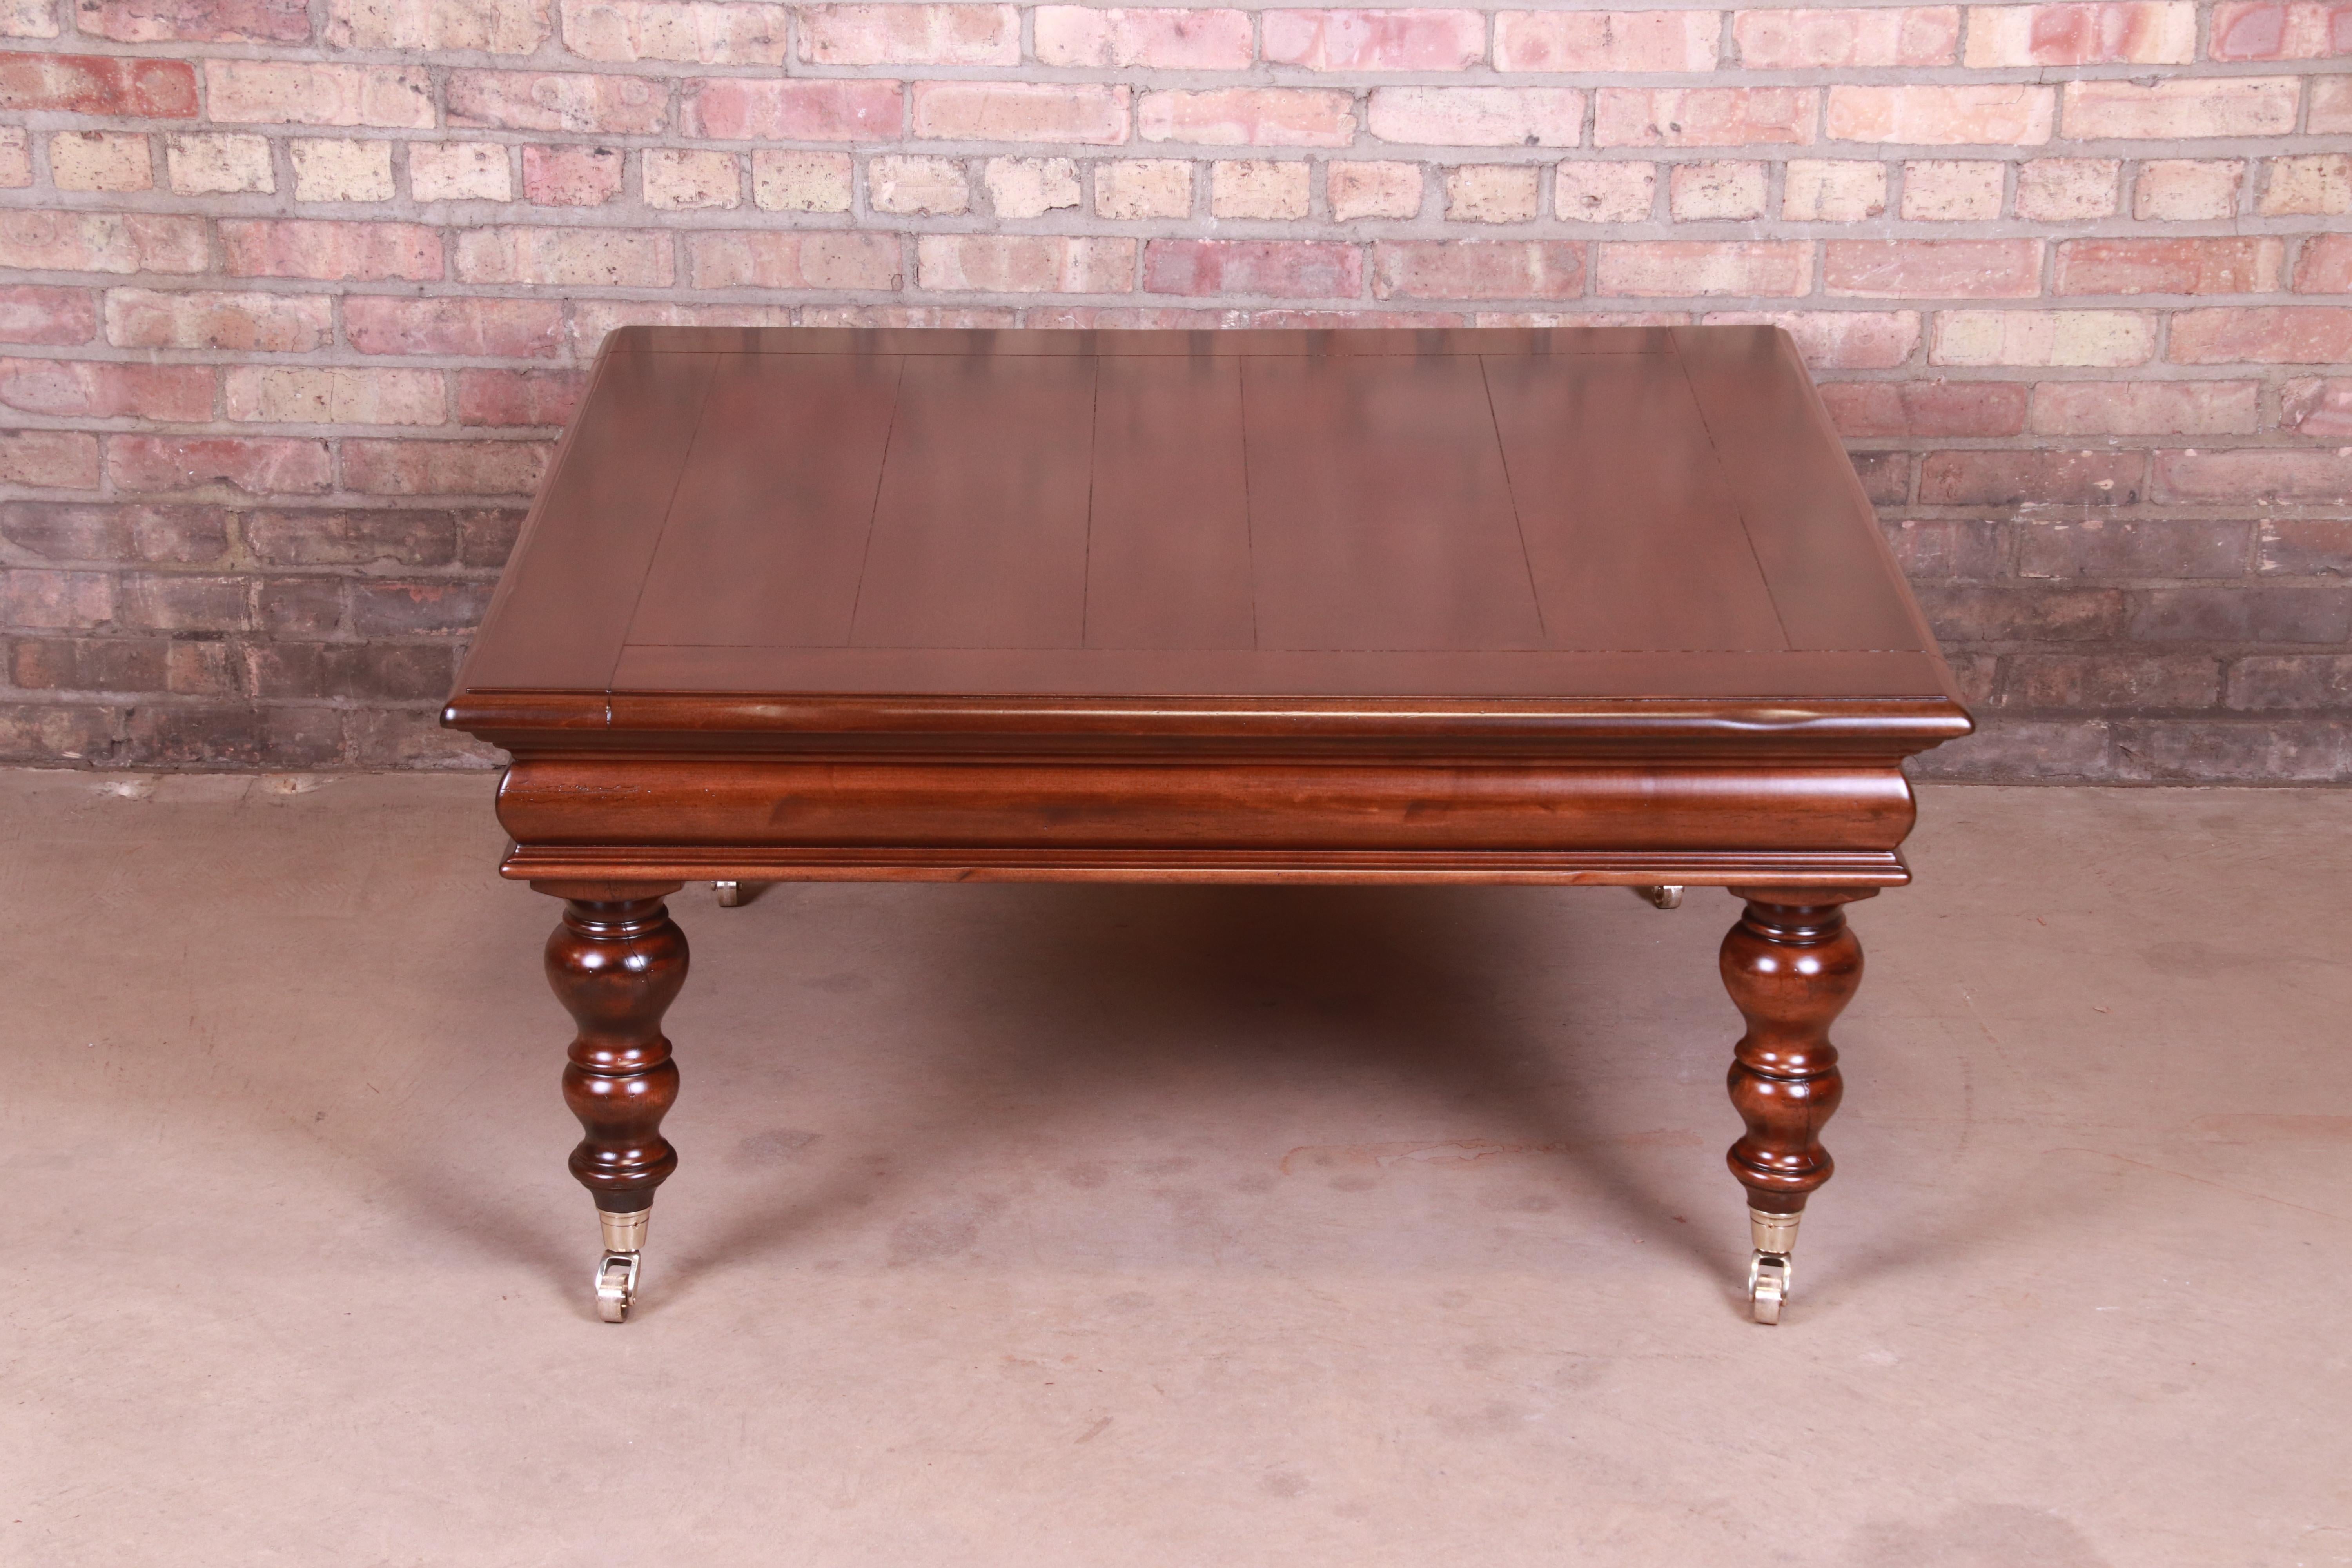 French Provincial Baker Furniture Italian Provincial Maple Coffee Table, Newly Refinished